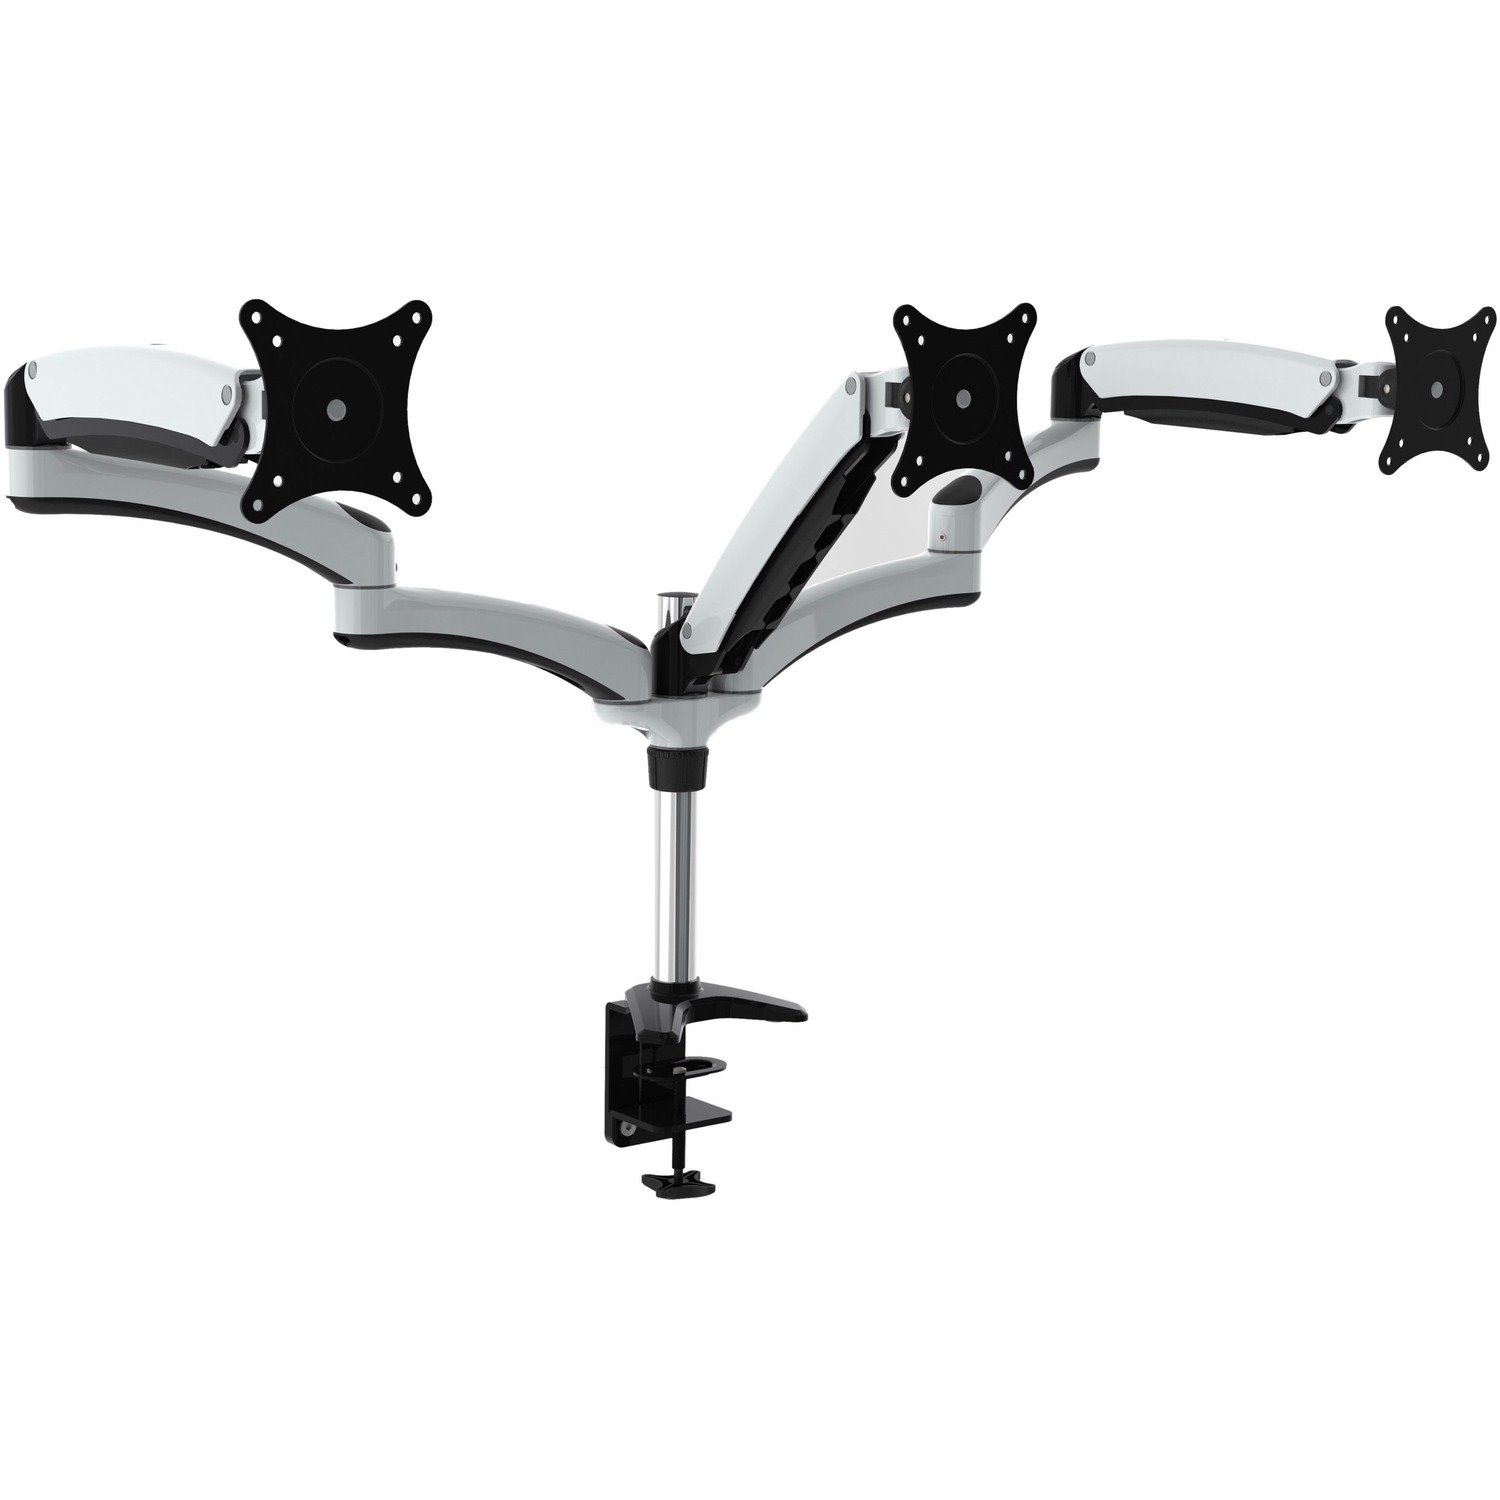 Amer Mounts Hydra3 Clamp Mount for Flat Panel Display, Curved Screen Display - Black, Chrome, White